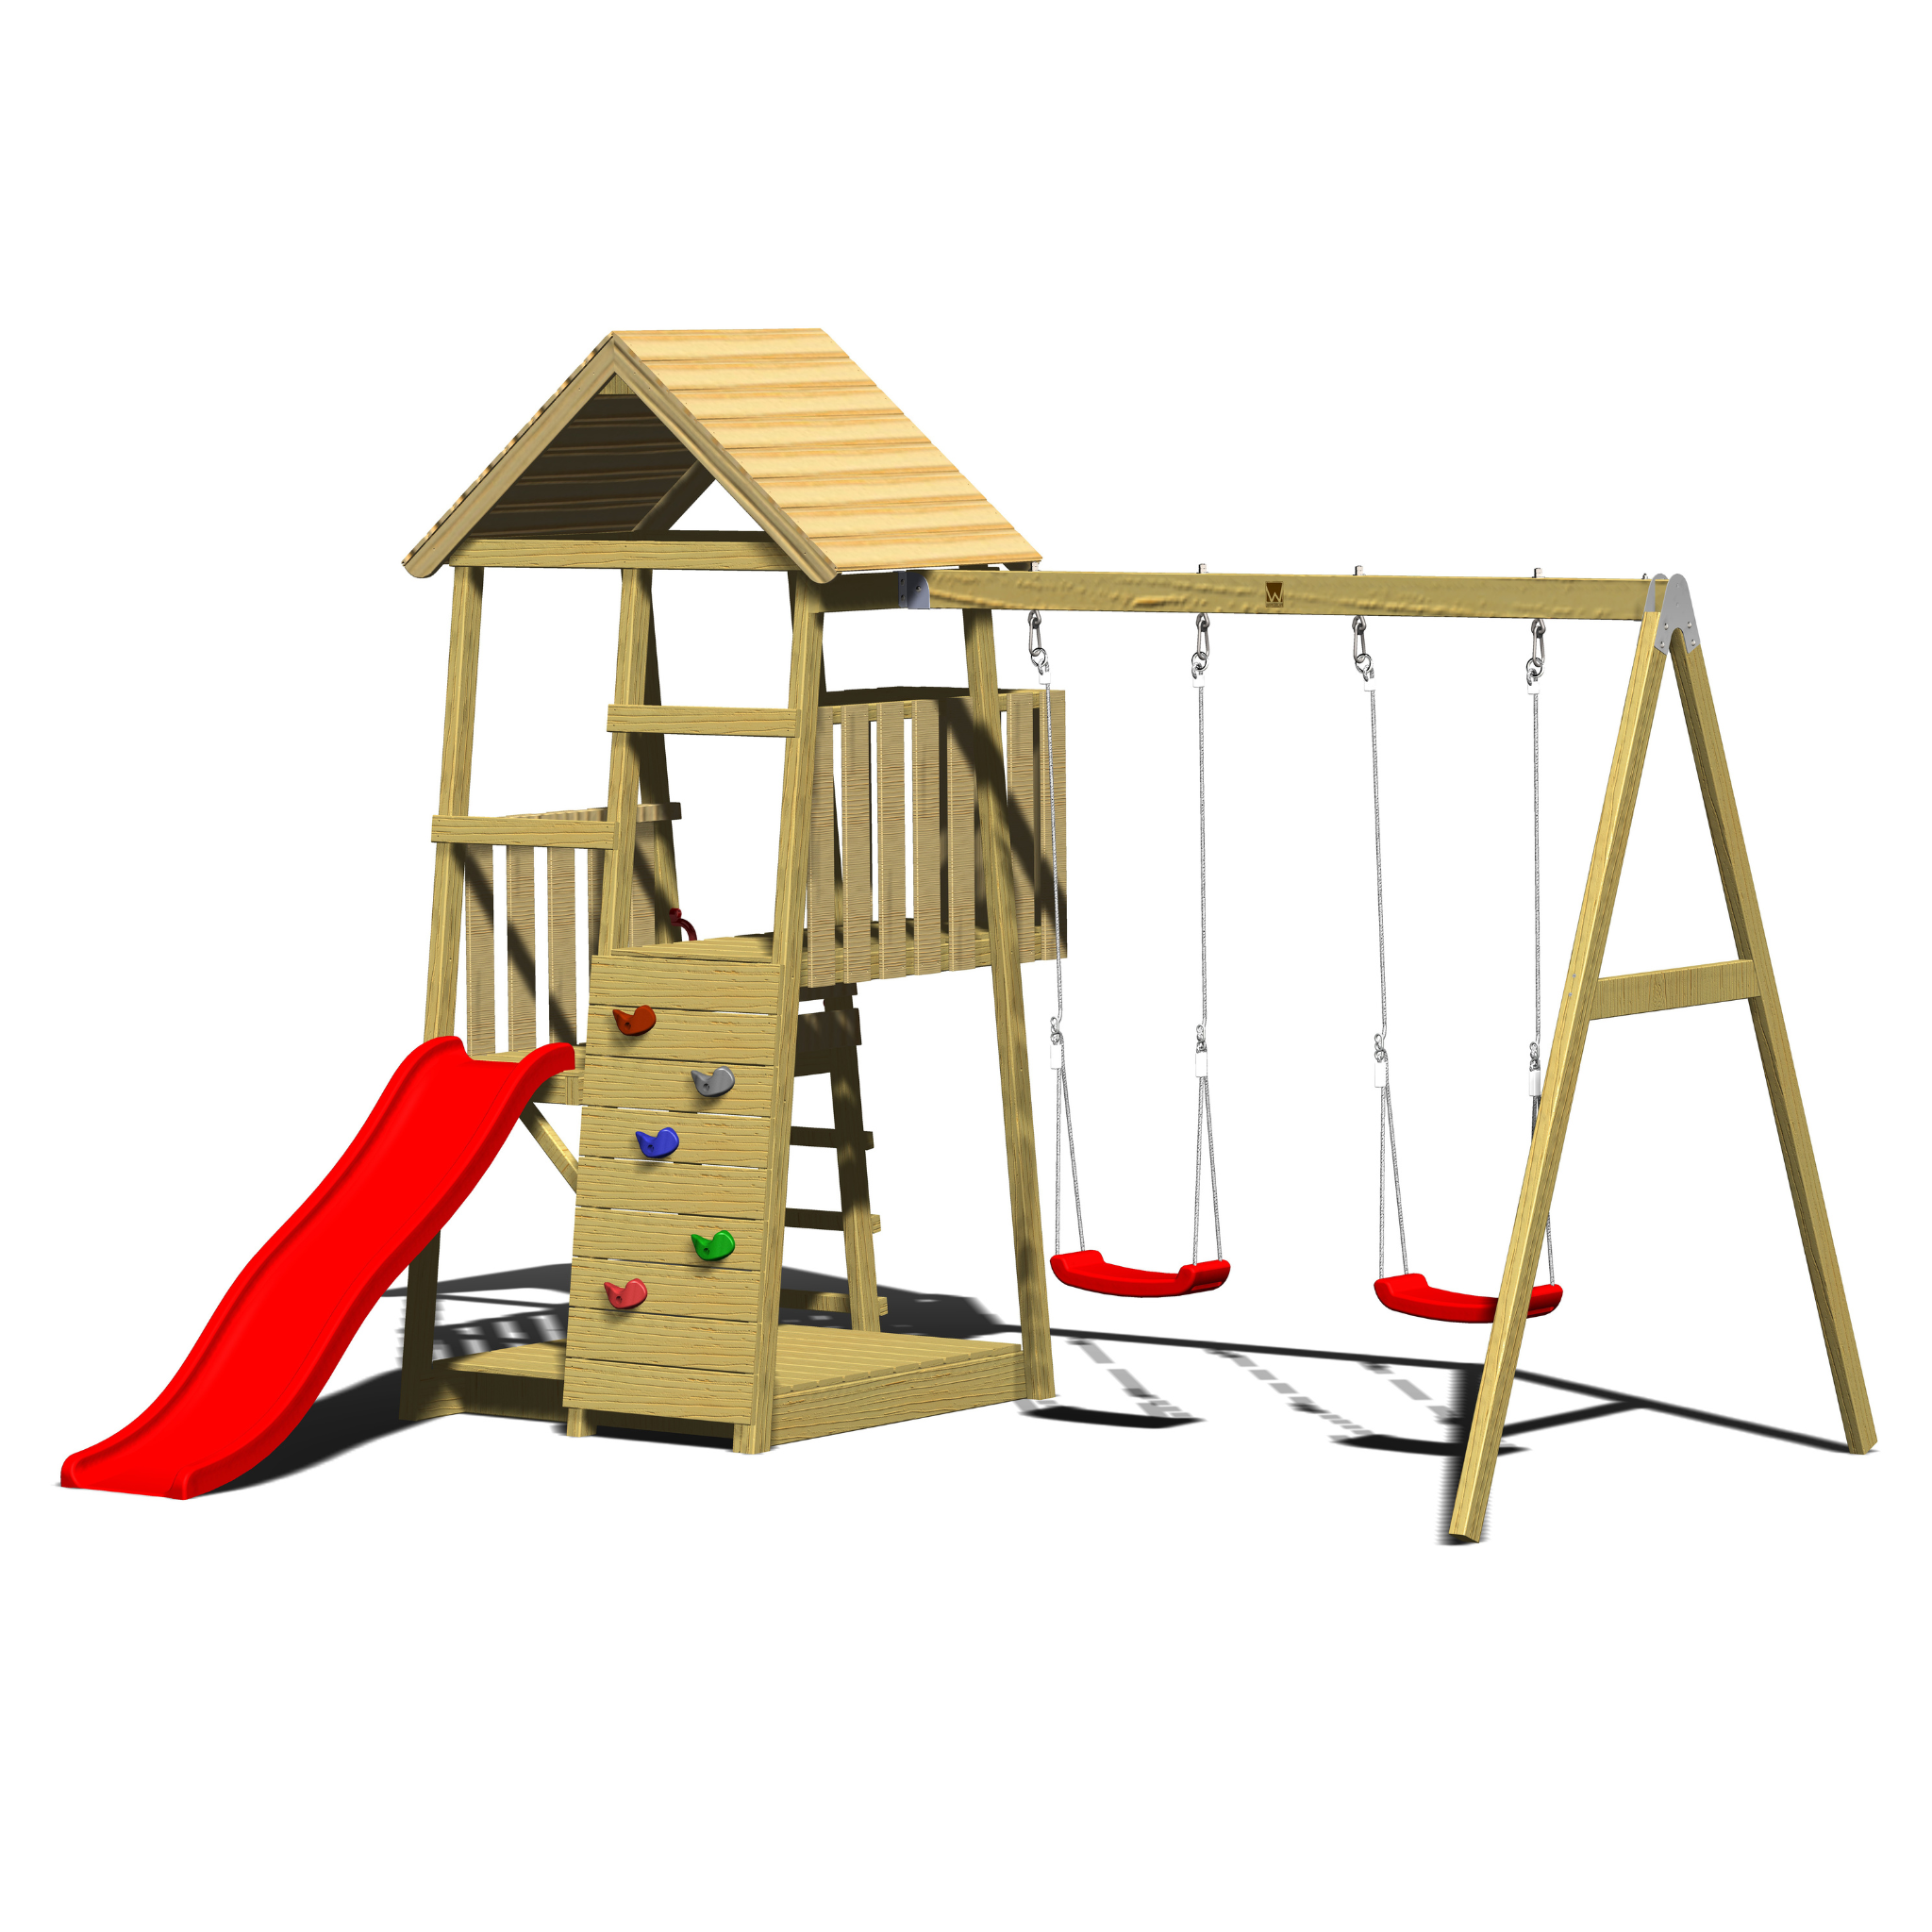 J6 Junior Activity Tower with Slide, Sandpit and Double Swing